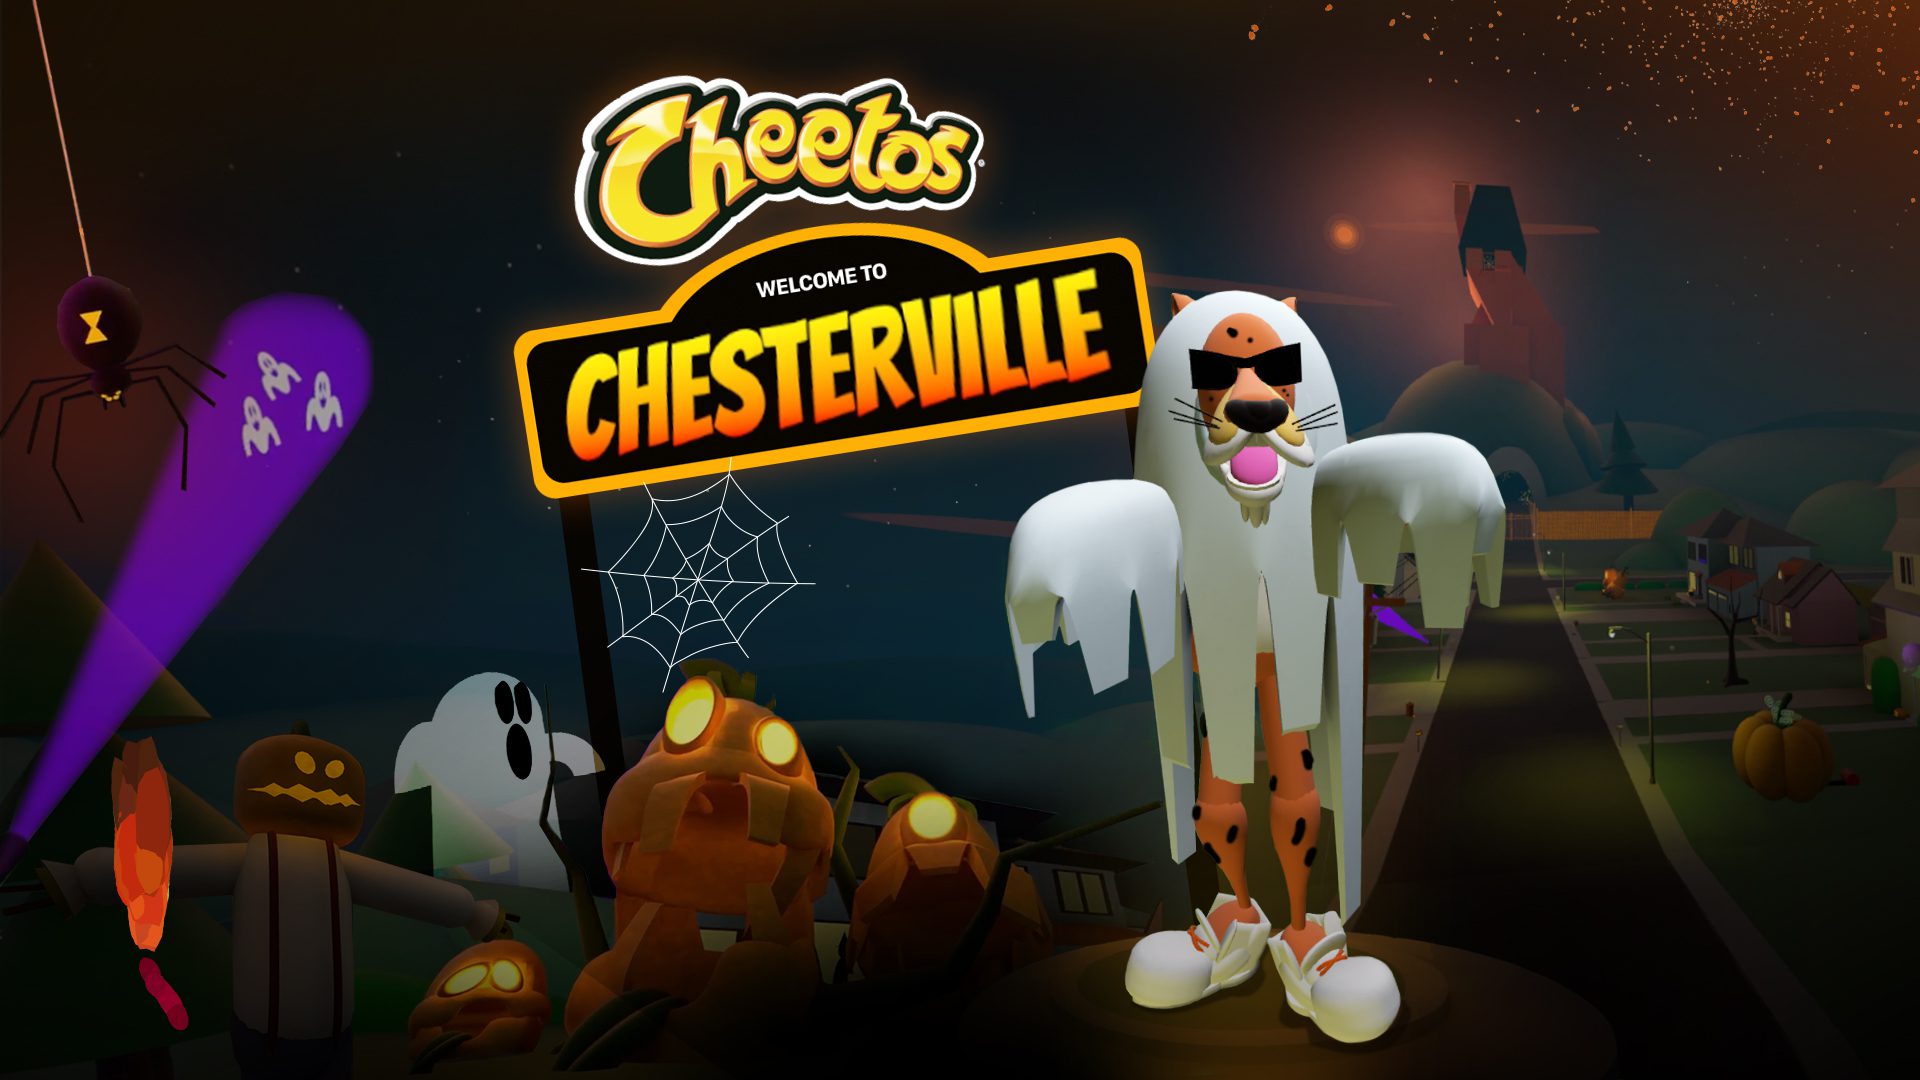 Vayner3 has teamed up with Cheetos and Meta Horizons World to unveil Chesterville™